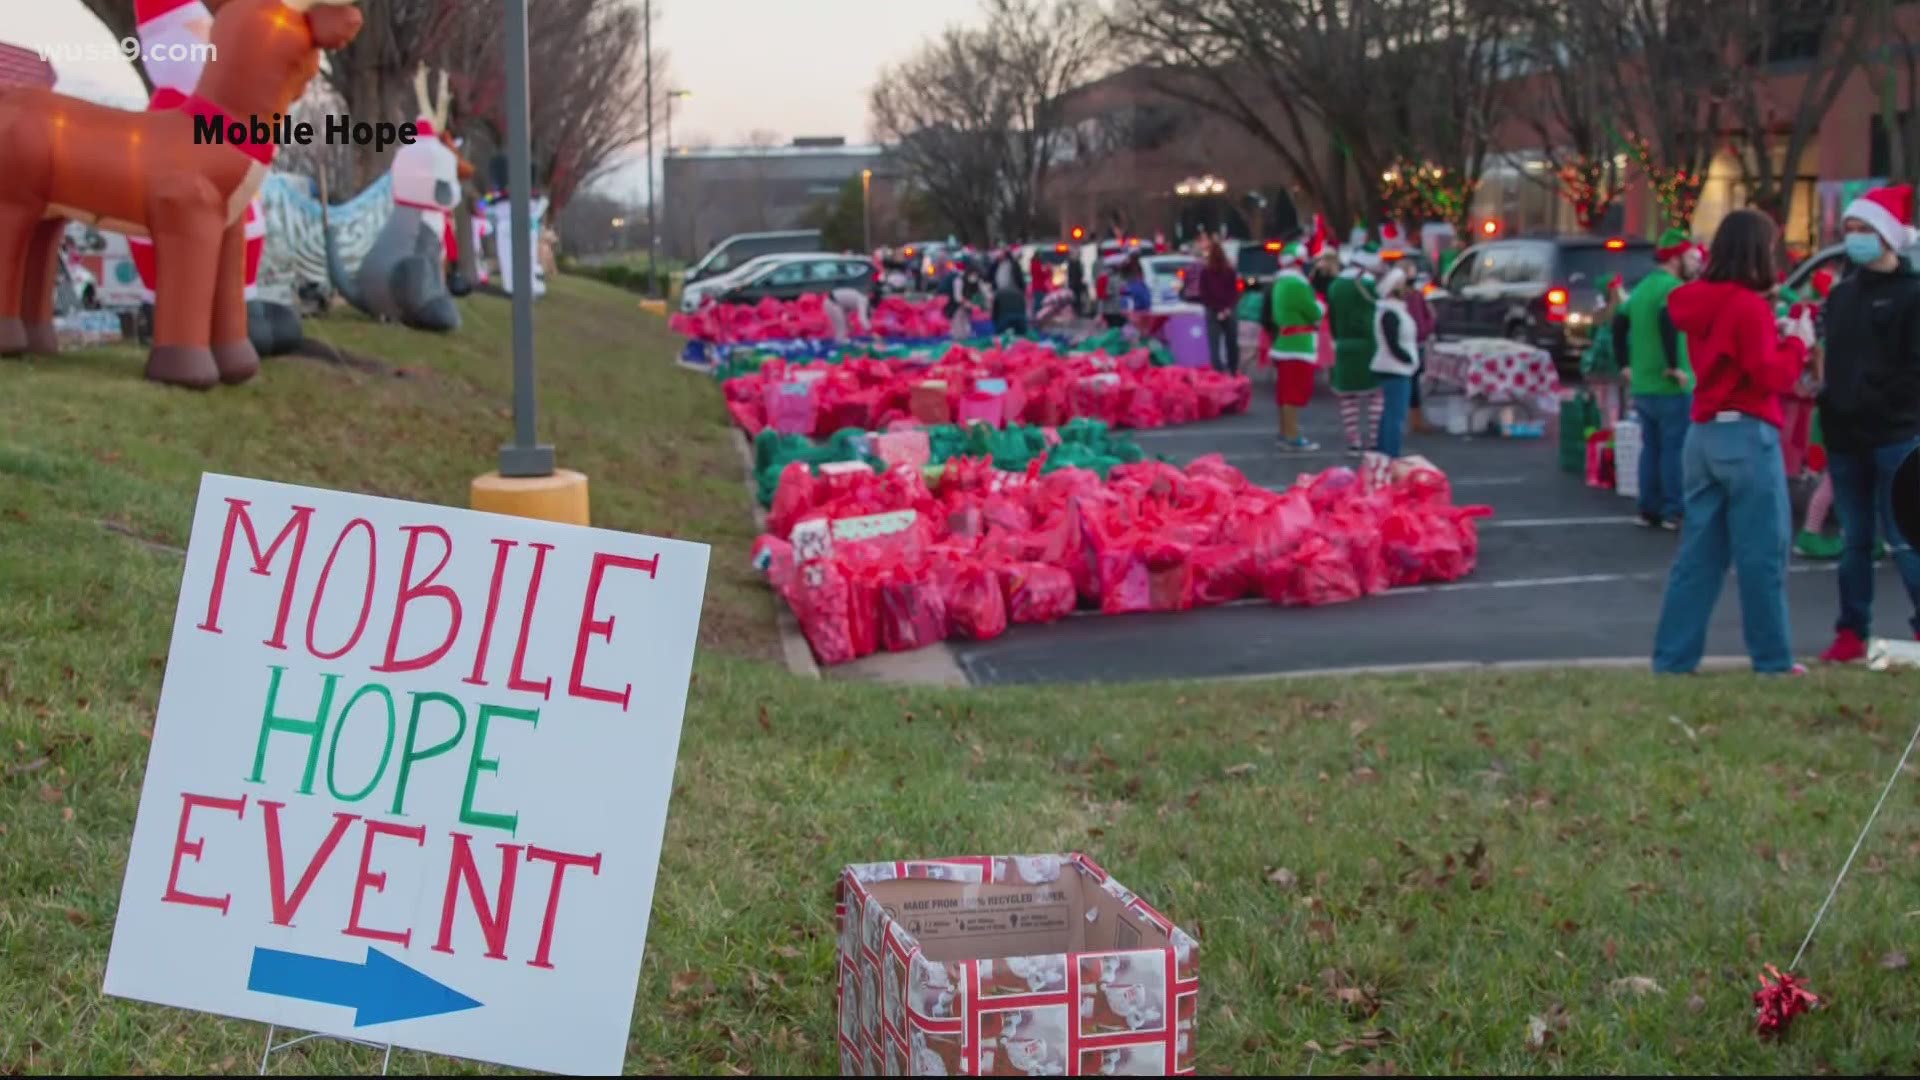 Mobile Hope has seen a spike in need during the holiday season